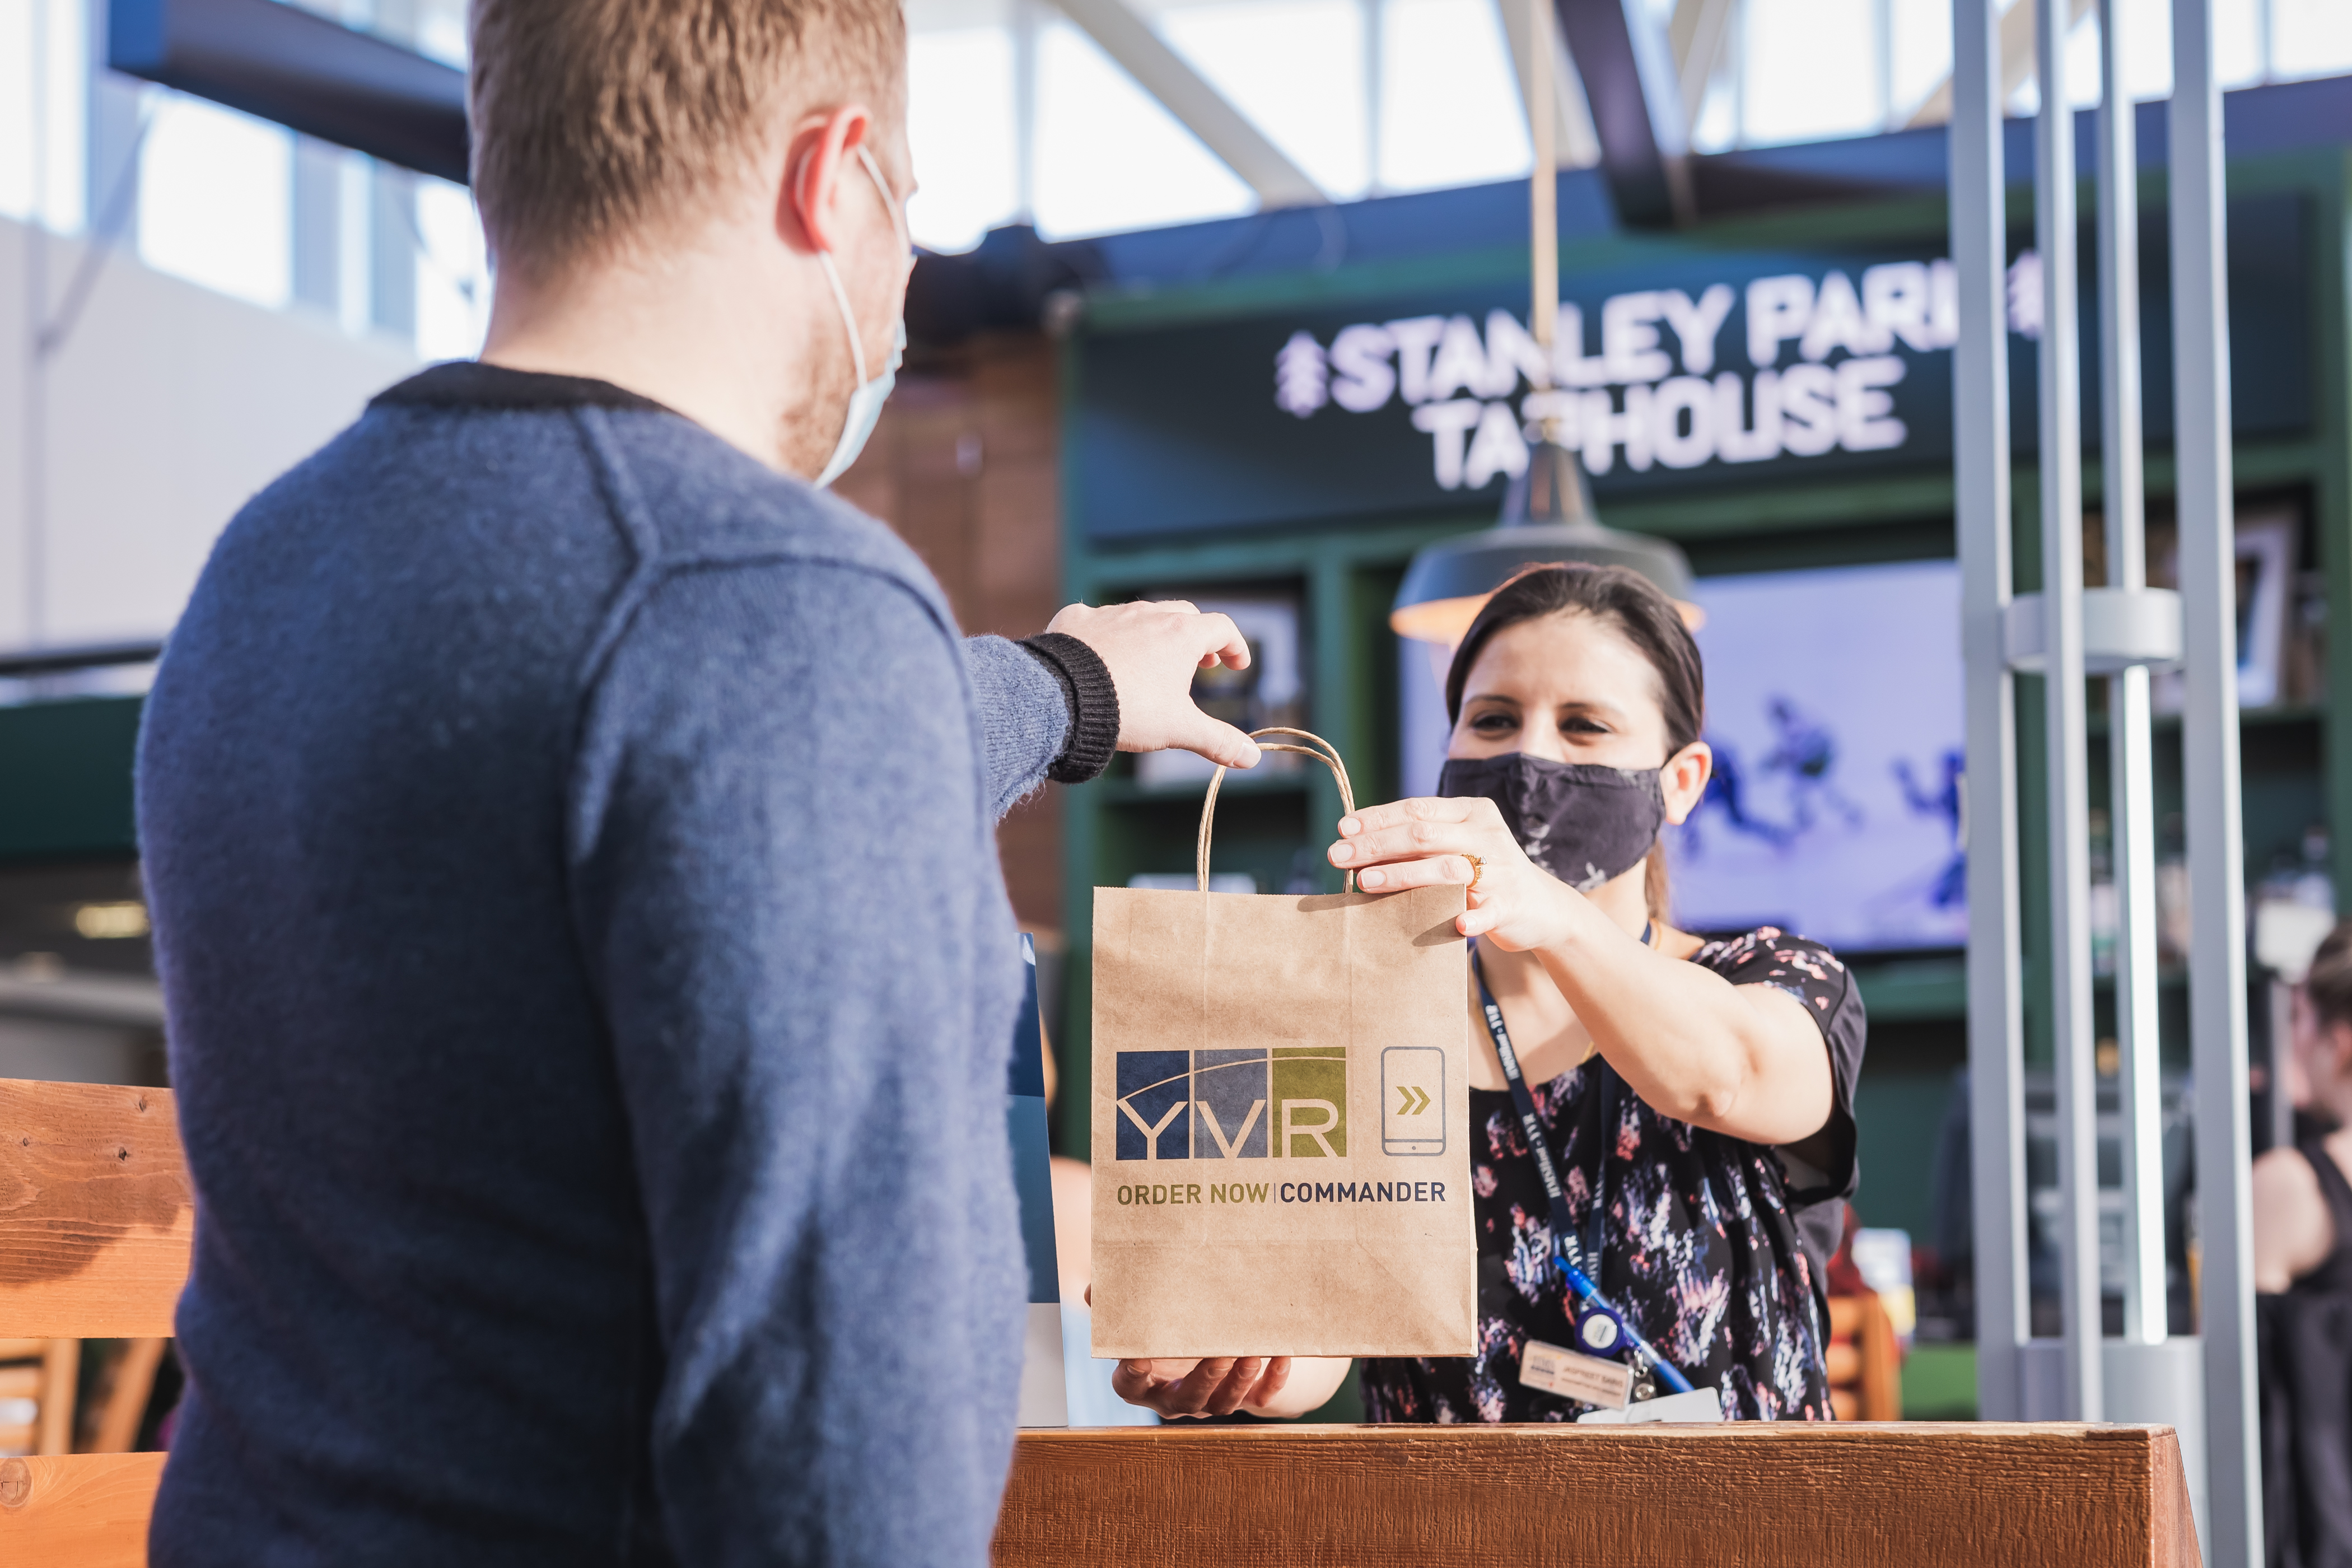 Servy strengthens presence in Canada with airport marketplace launch at YVR